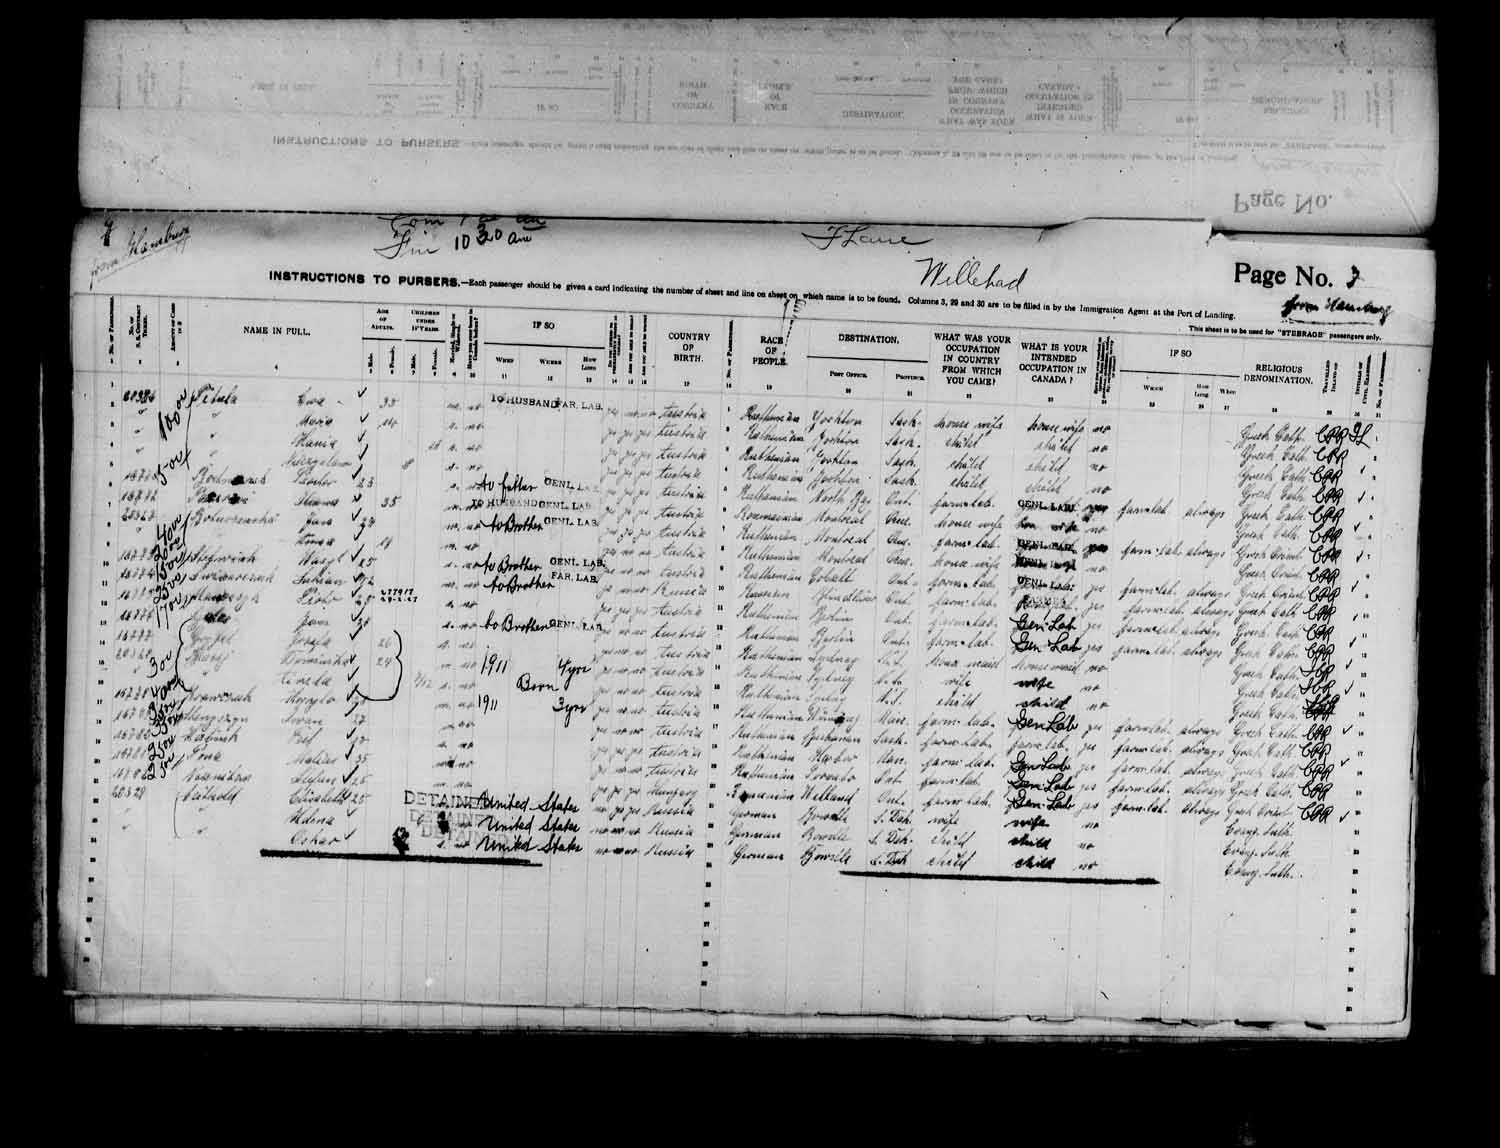 Digitized page of Passenger Lists for Image No.: e003575019